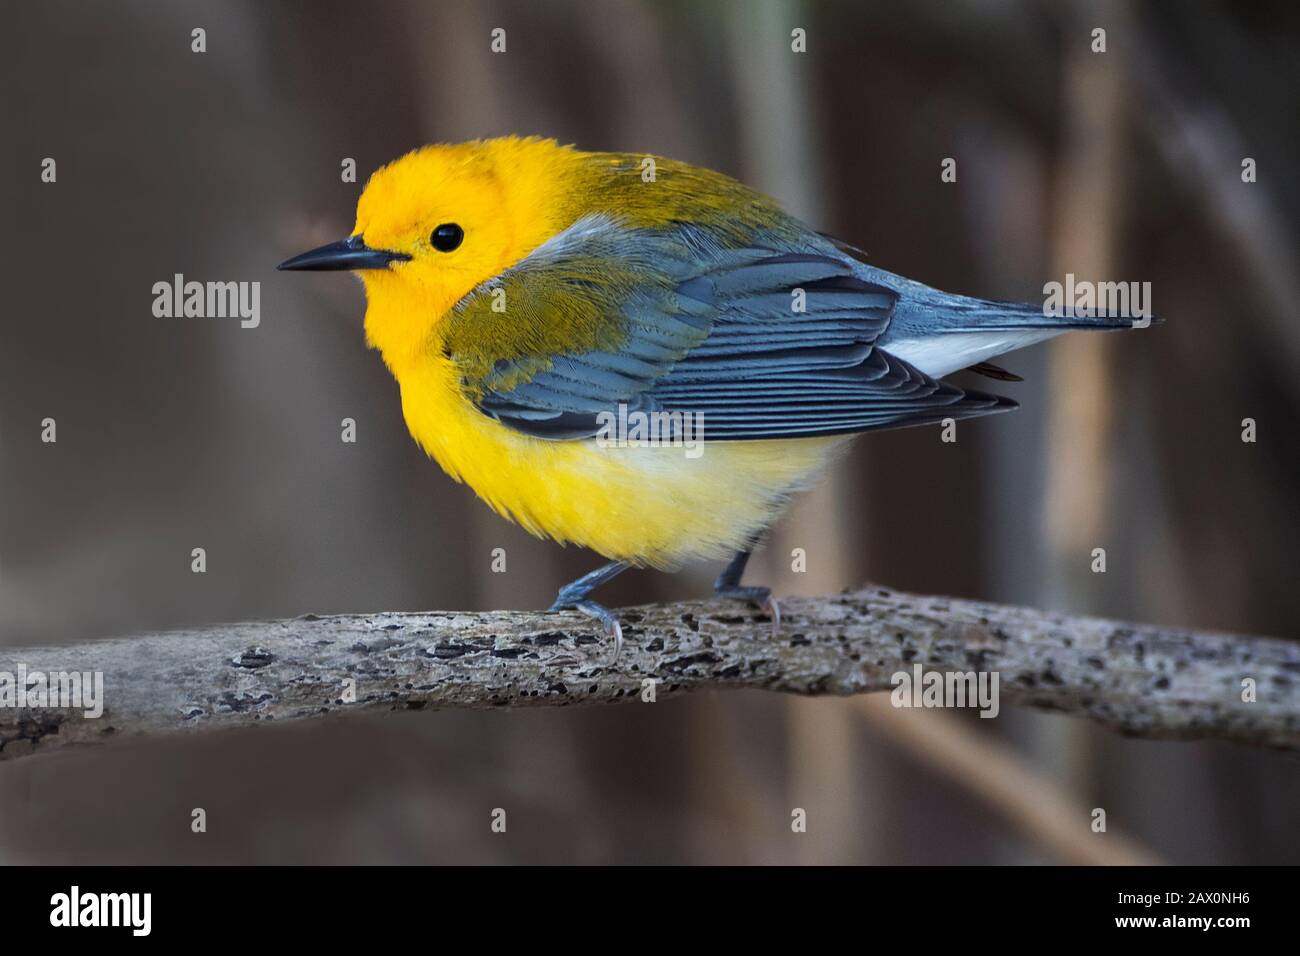 Prothonotary warbler during spring migration Stock Photo